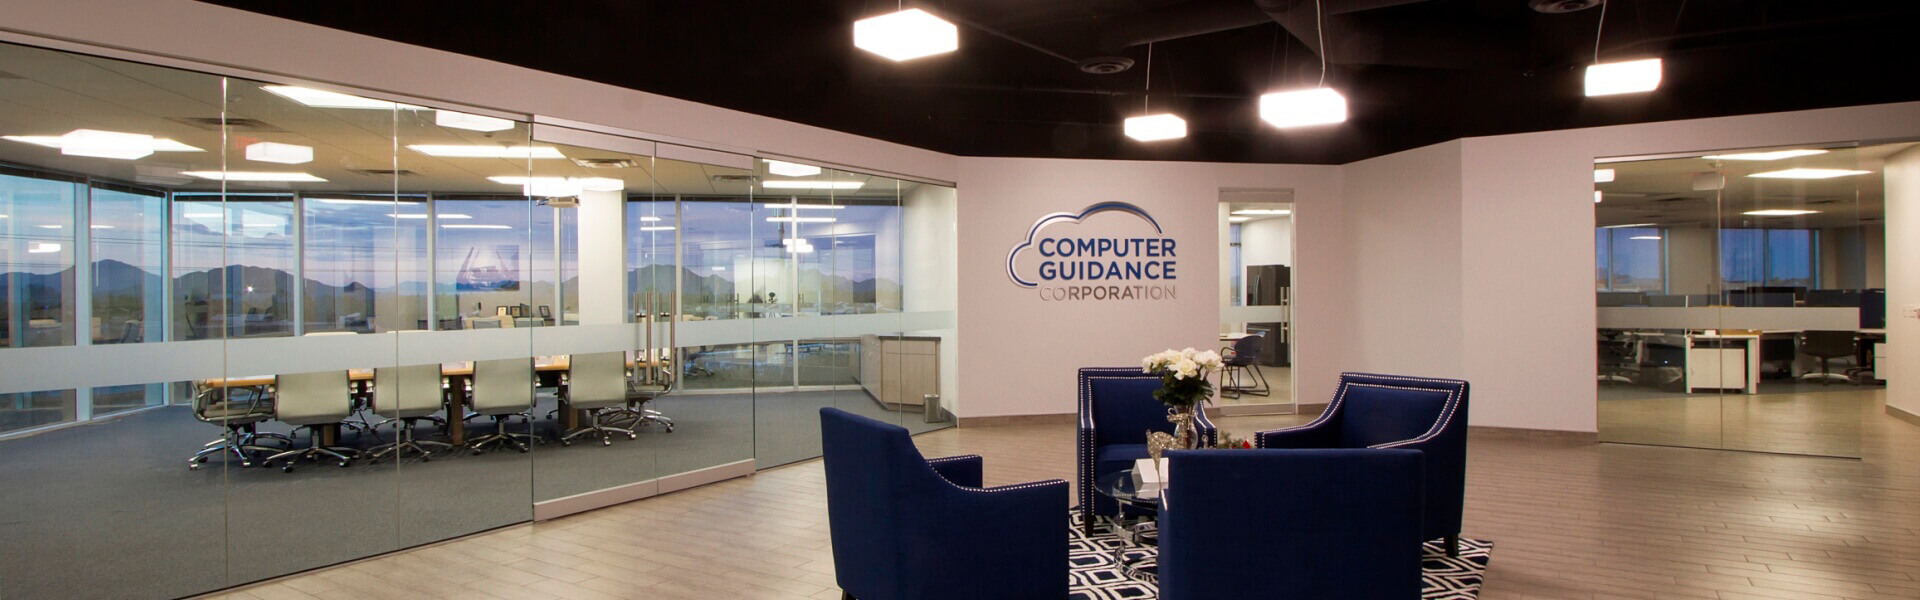 Lobby of Computer Guidance project with conference room in background